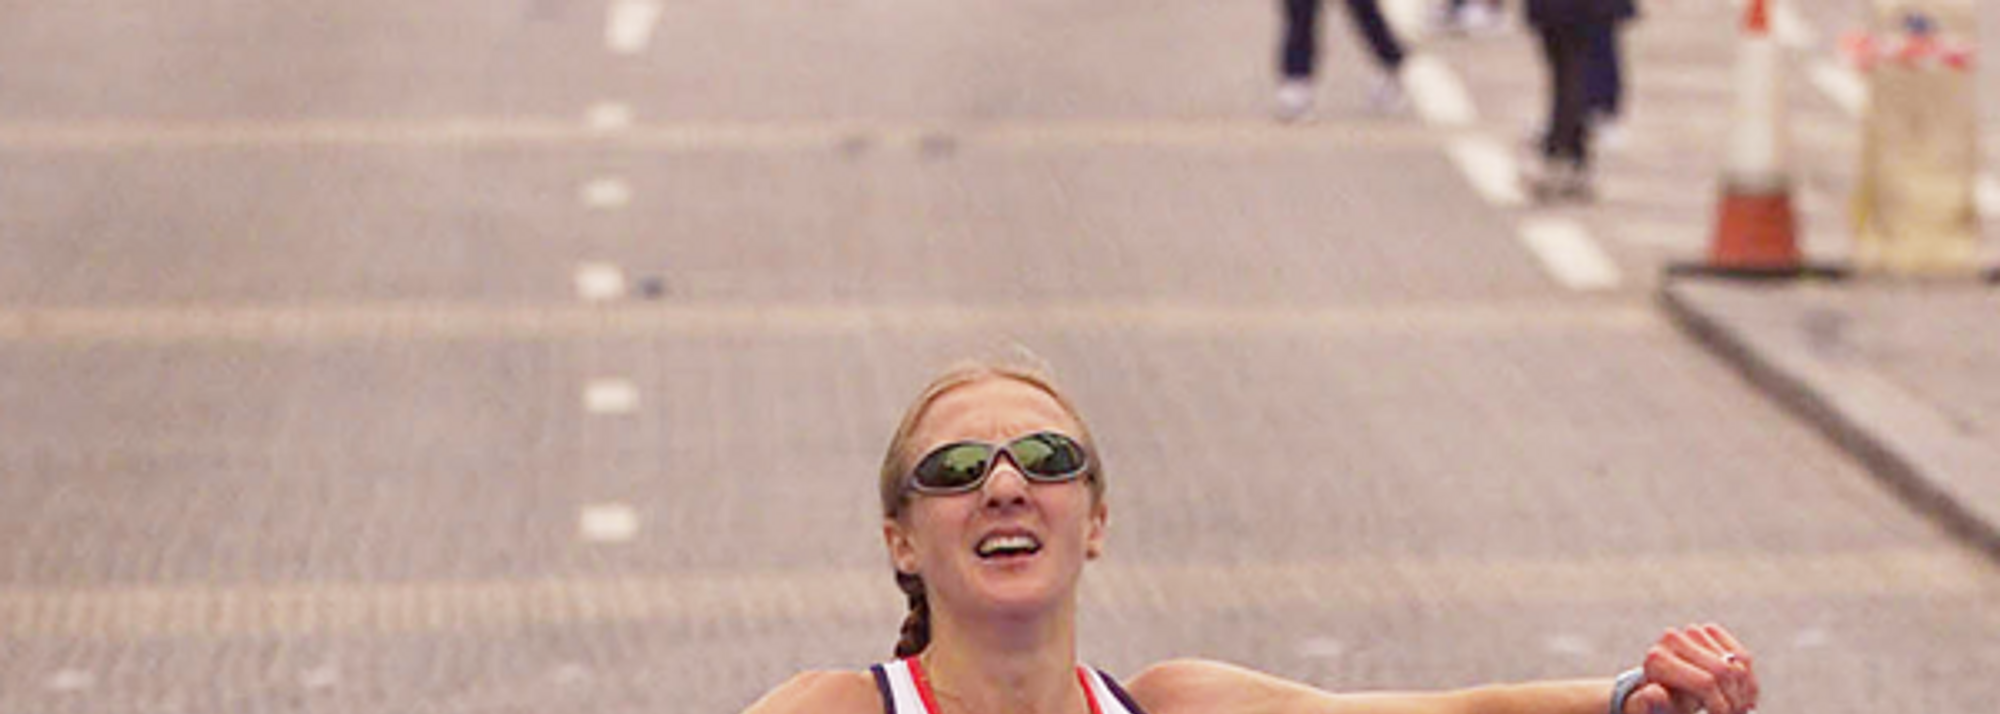 What started as a wretched weekend for British athletics ended in triumph as Paula Radcliffe not only retained her world half marathon title in front of her home fans, but ran the second-fastest time in history.